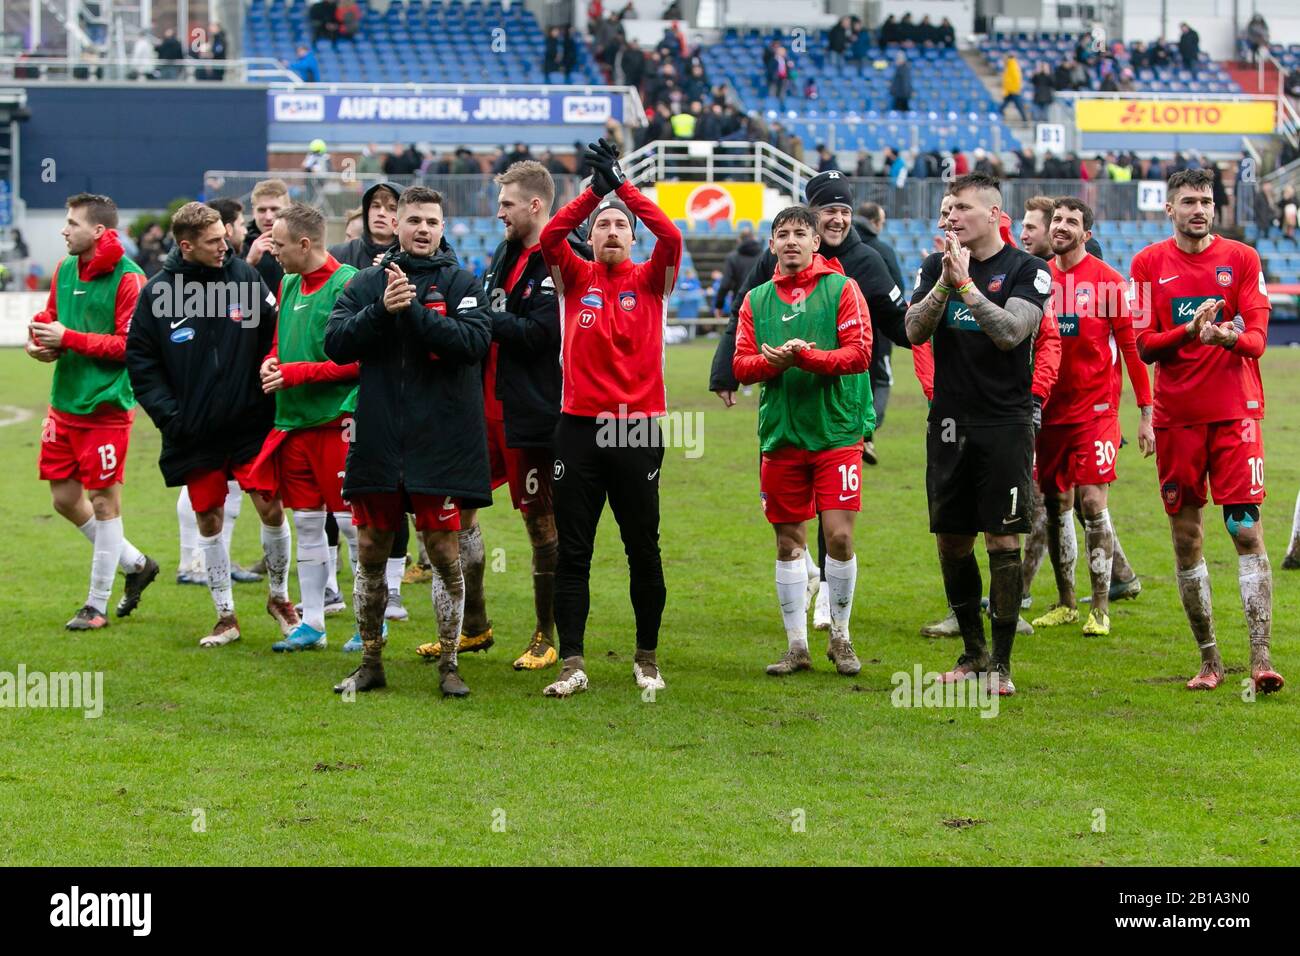 Kiel, Germany. 22nd Feb, 2020. Football: 2nd Bundesliga, Holstein Kiel - 1st FC Heidenheim, 23rd matchday. The Heidenheim players celebrate after their victory in Kiel. Credit: Frank Molter/dpa - IMPORTANT NOTE: In accordance with the regulations of the DFL Deutsche Fußball Liga and the DFB Deutscher Fußball-Bund, it is prohibited to exploit or have exploited in the stadium and/or from the game taken photographs in the form of sequence images and/or video-like photo series./dpa/Alamy Live News Stock Photo